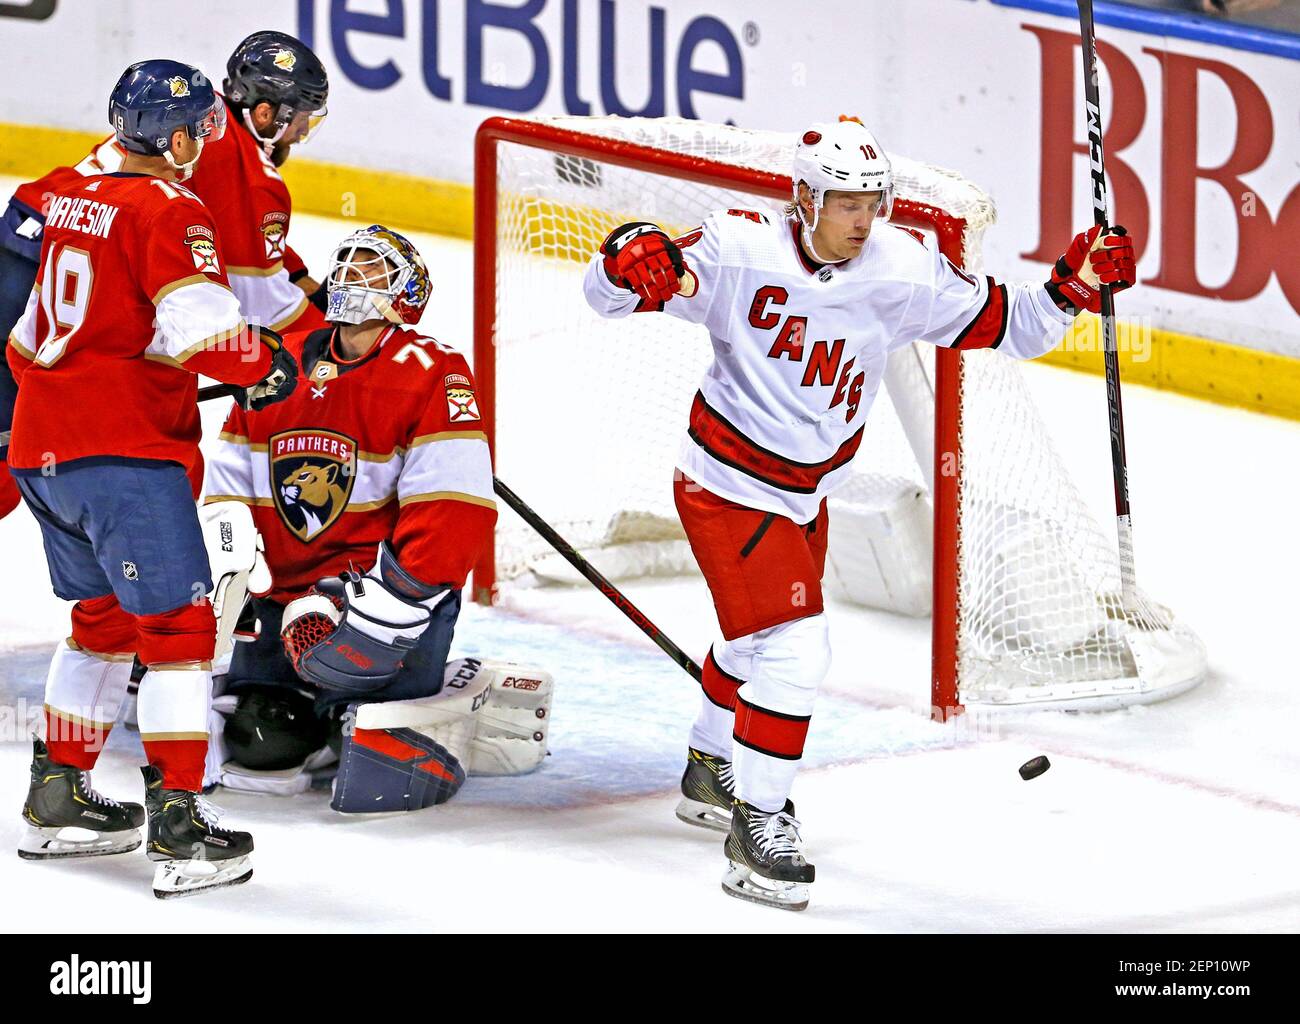 Florida Panthers goalie Sergei Bobrovsky (72) reacts as Carolina Hurricanes center Ryan Dzingel (18) celebrates after scoring a power play goal during the first period of an NHL hockey game at the BB&T Center Tuesday, Oct. 8, 2019 in Sunrise, Fla. (Photo by David Santiago/Miami Herald/TNS/Sipa USA) Stock Photo